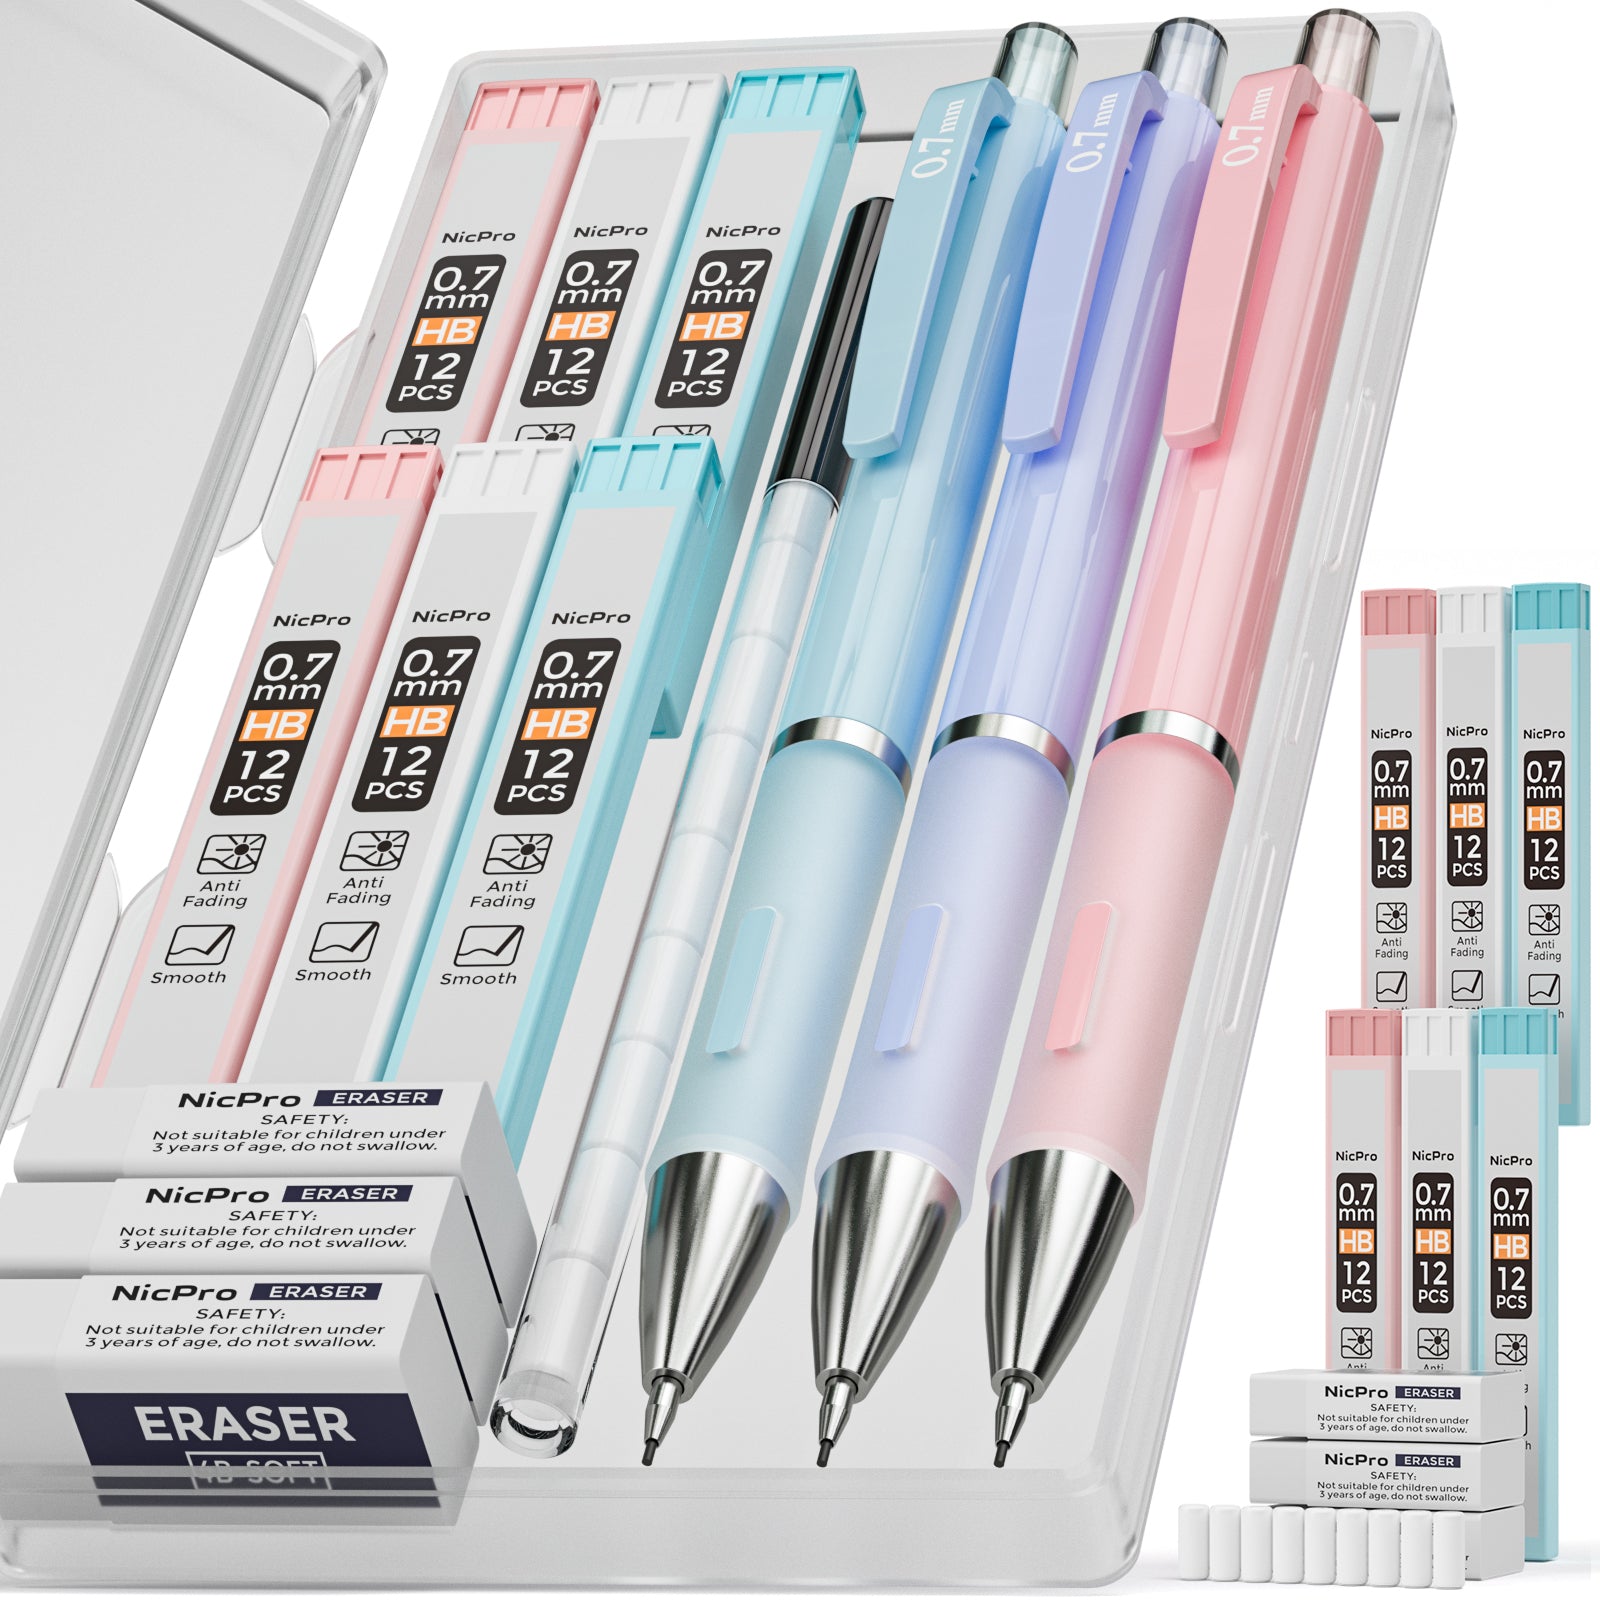 Nicpro 3 Pcs 0.7mm Pastel Mechanical Pencils, with 6 tubes HB Lead Refills, Erasers, Eraser Refills - Come with Case